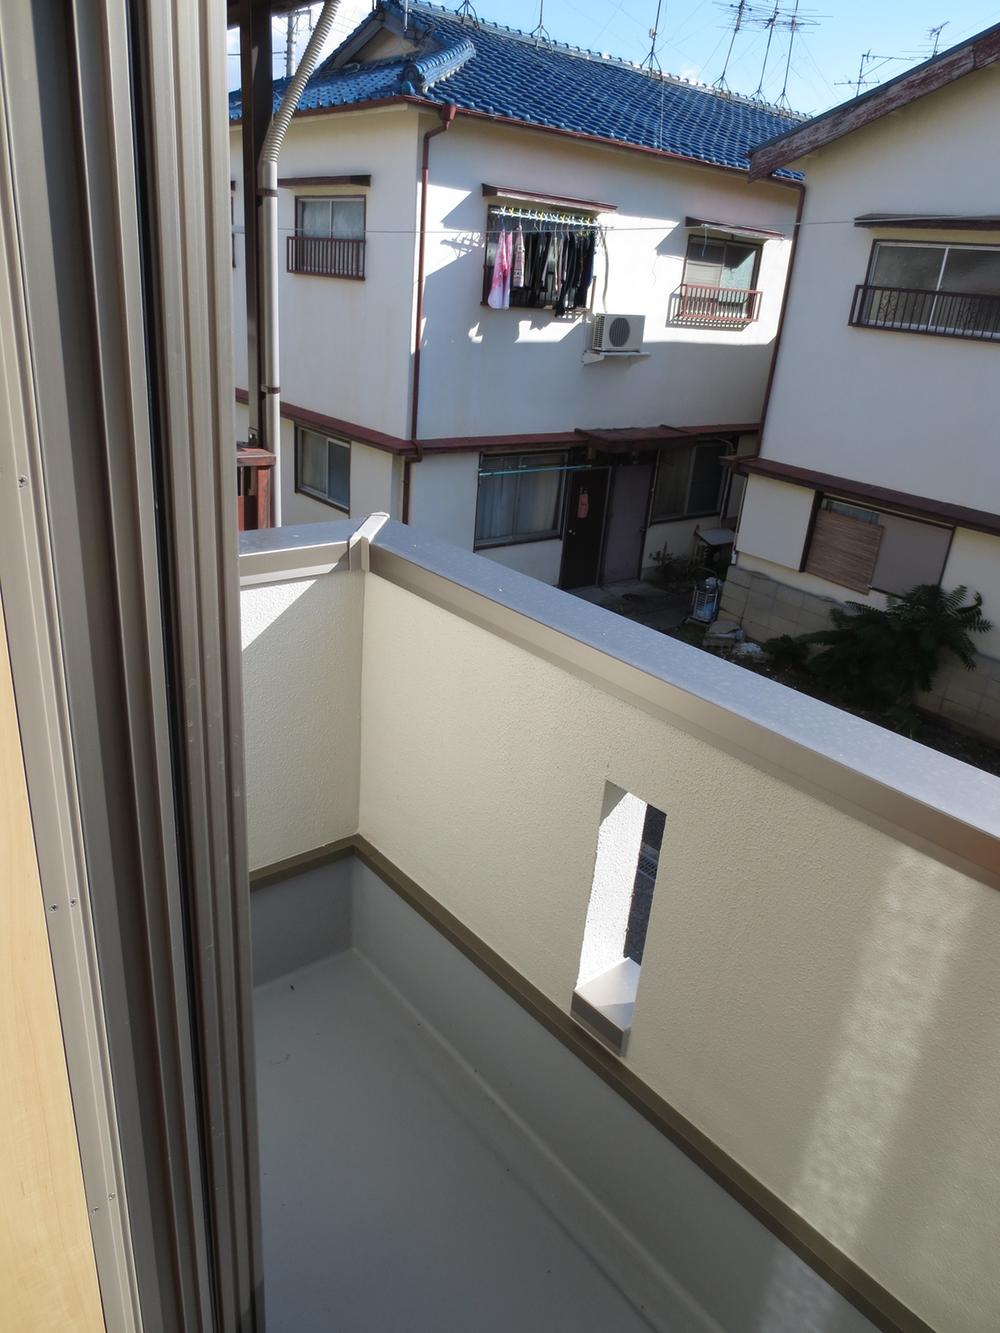 View photos from the dwelling unit. Two-sided balcony. Sunny